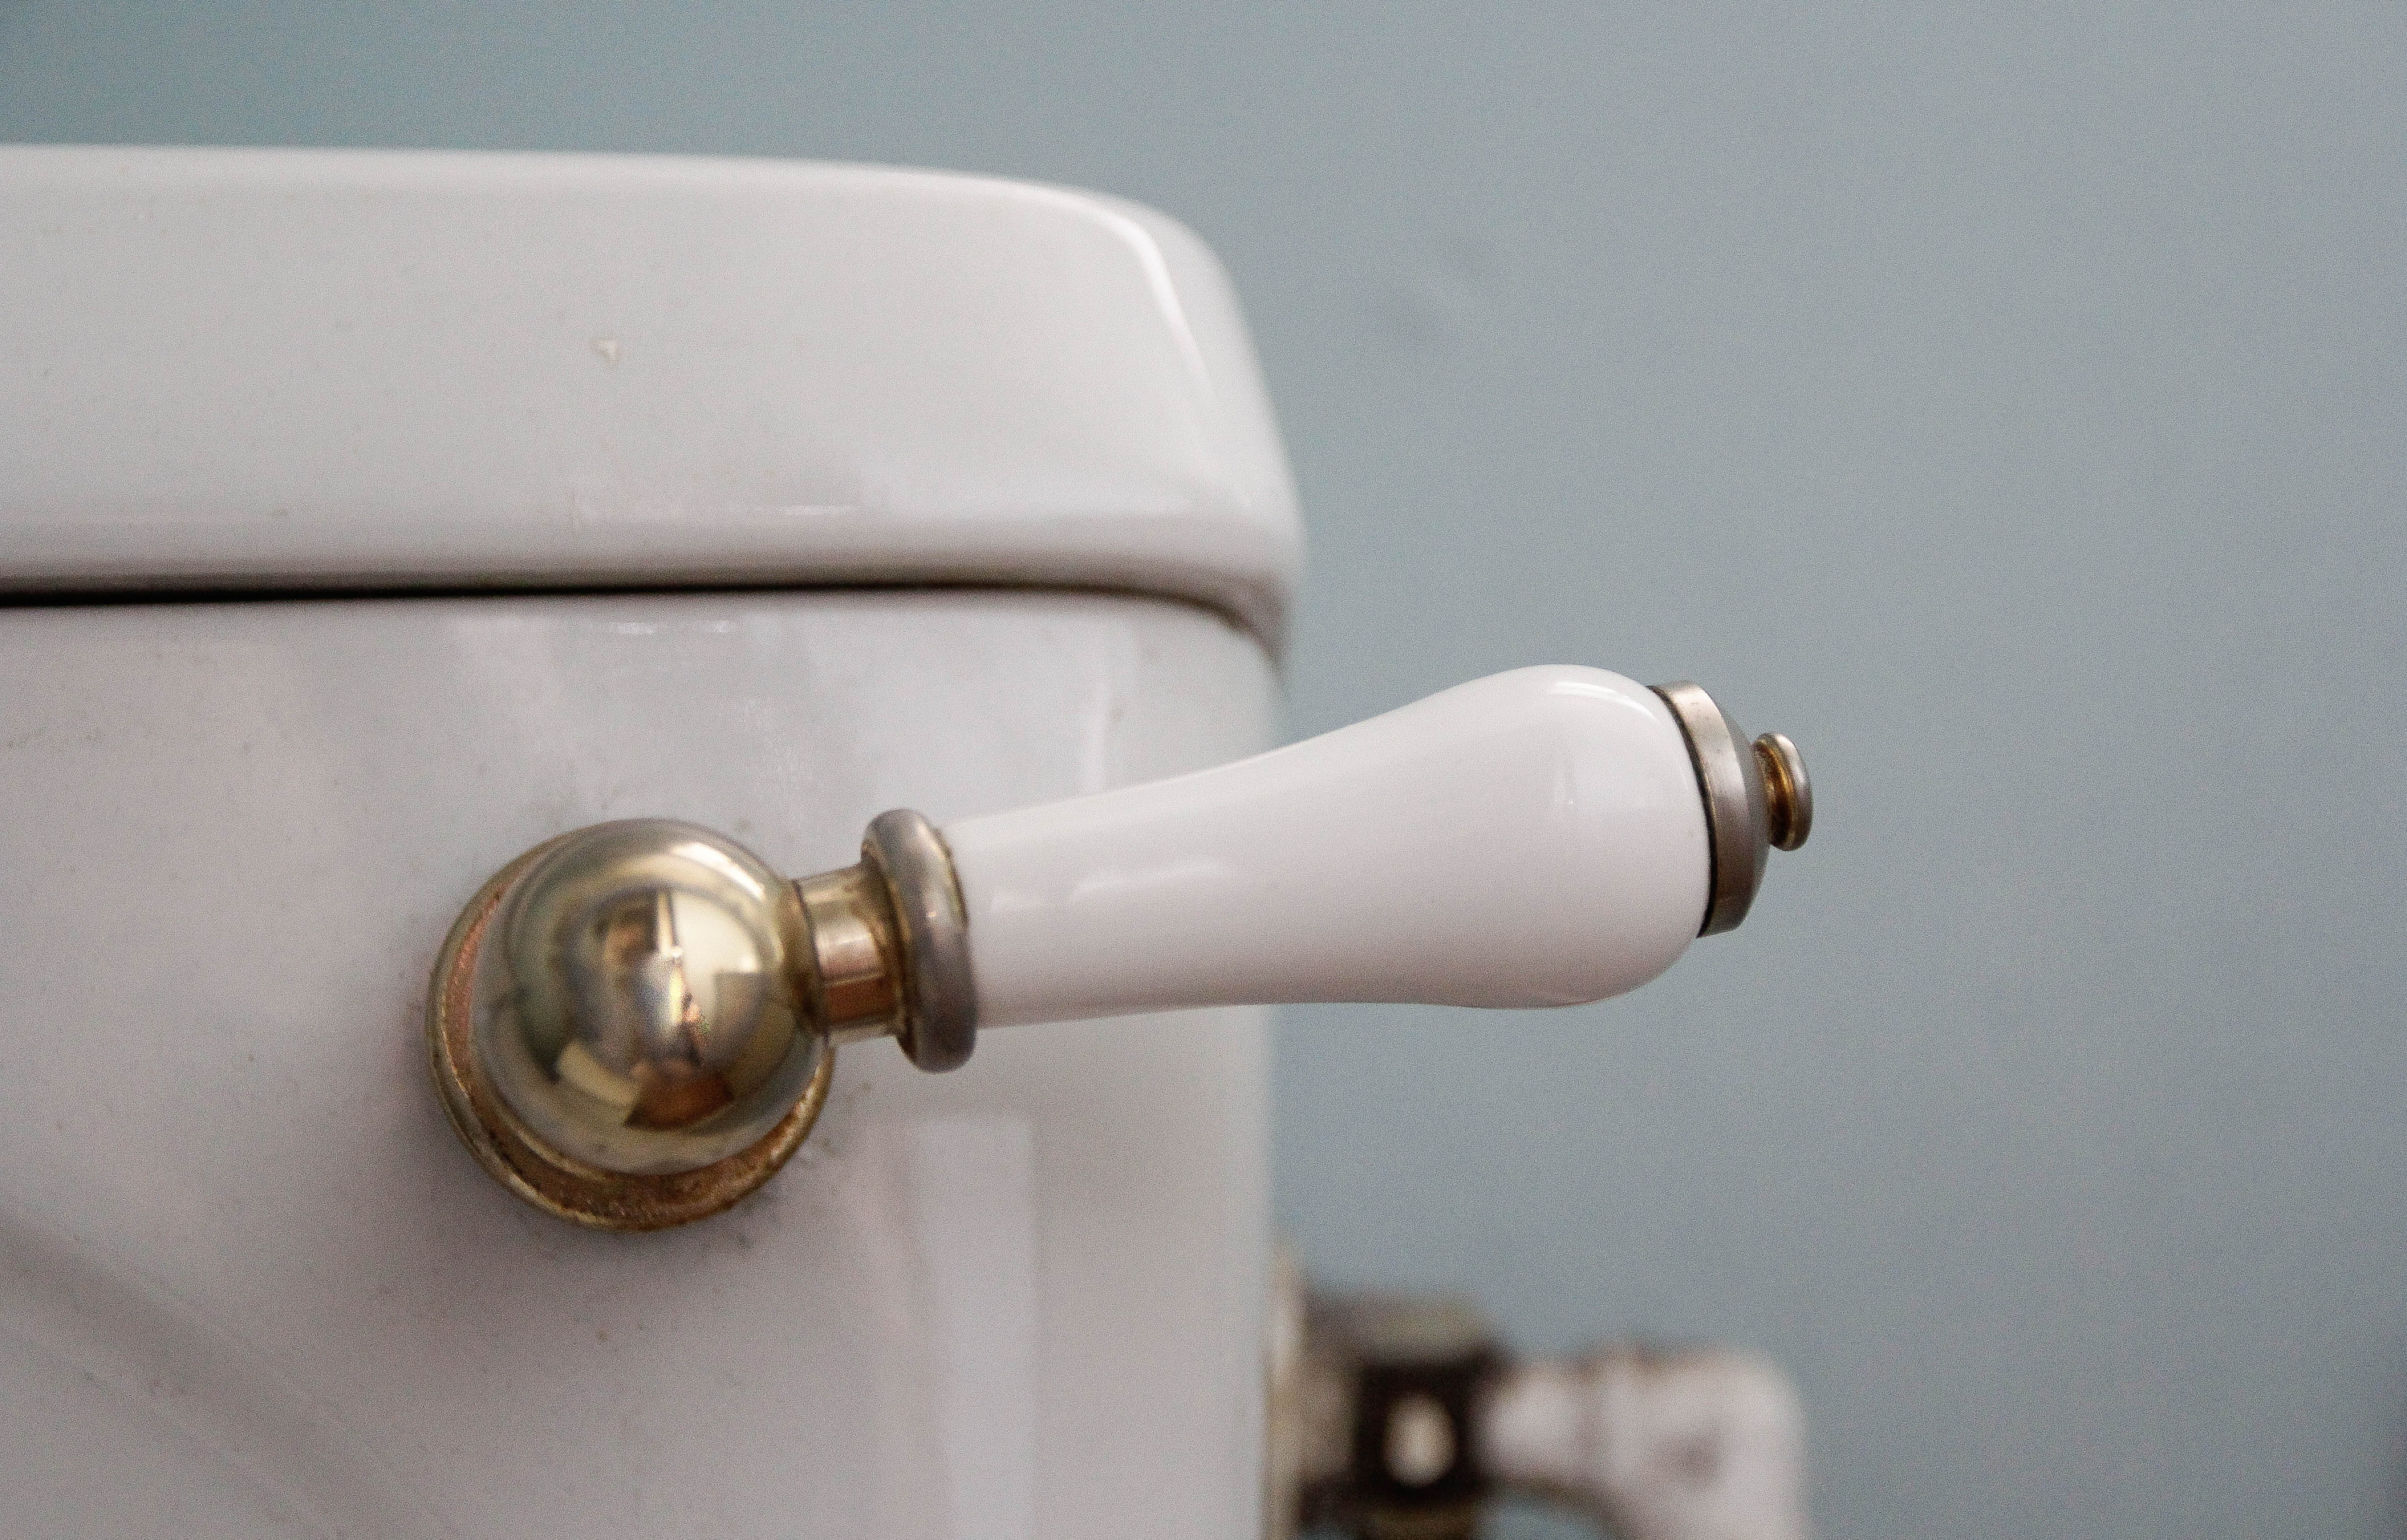 a close up of a toilet handle